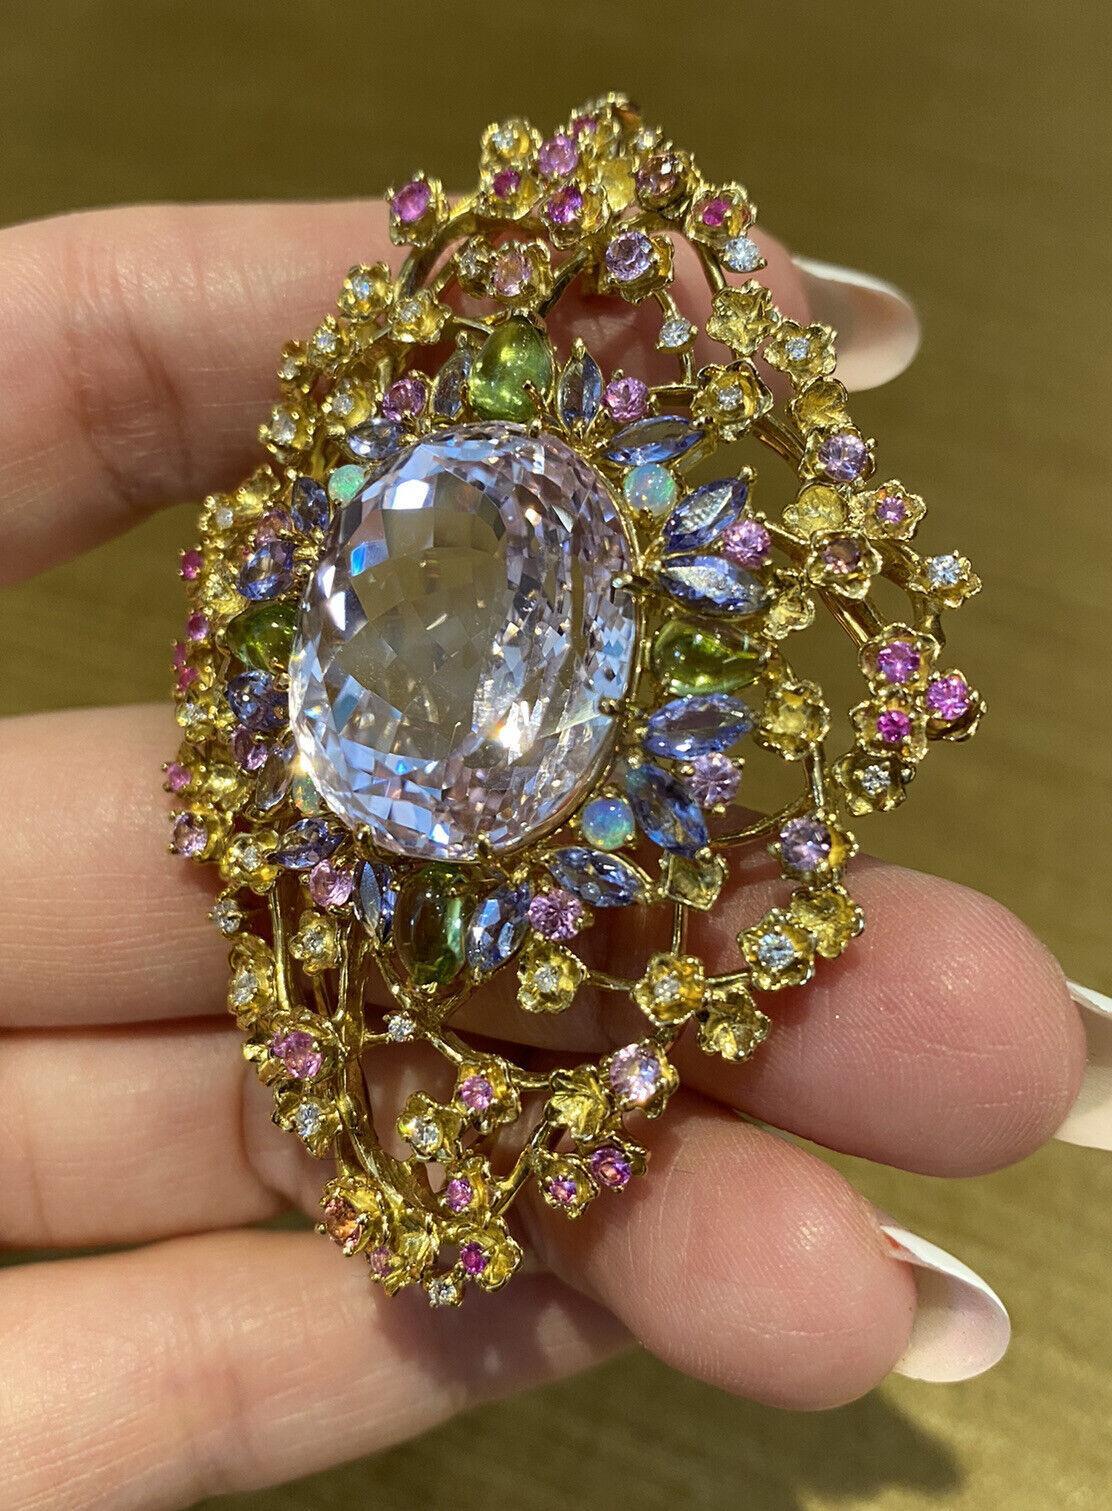 Kunzite and Multi-gems Diamond Pin / Brooch in 18k Yellow Gold

Kunzite and Multi-gems Diamond Brooch features a large Oval-shaped Kunzite weighing 41.63 carats, accented by pastel colored Tanzanite, Peridots, and Diamonds set in 18k Yellow